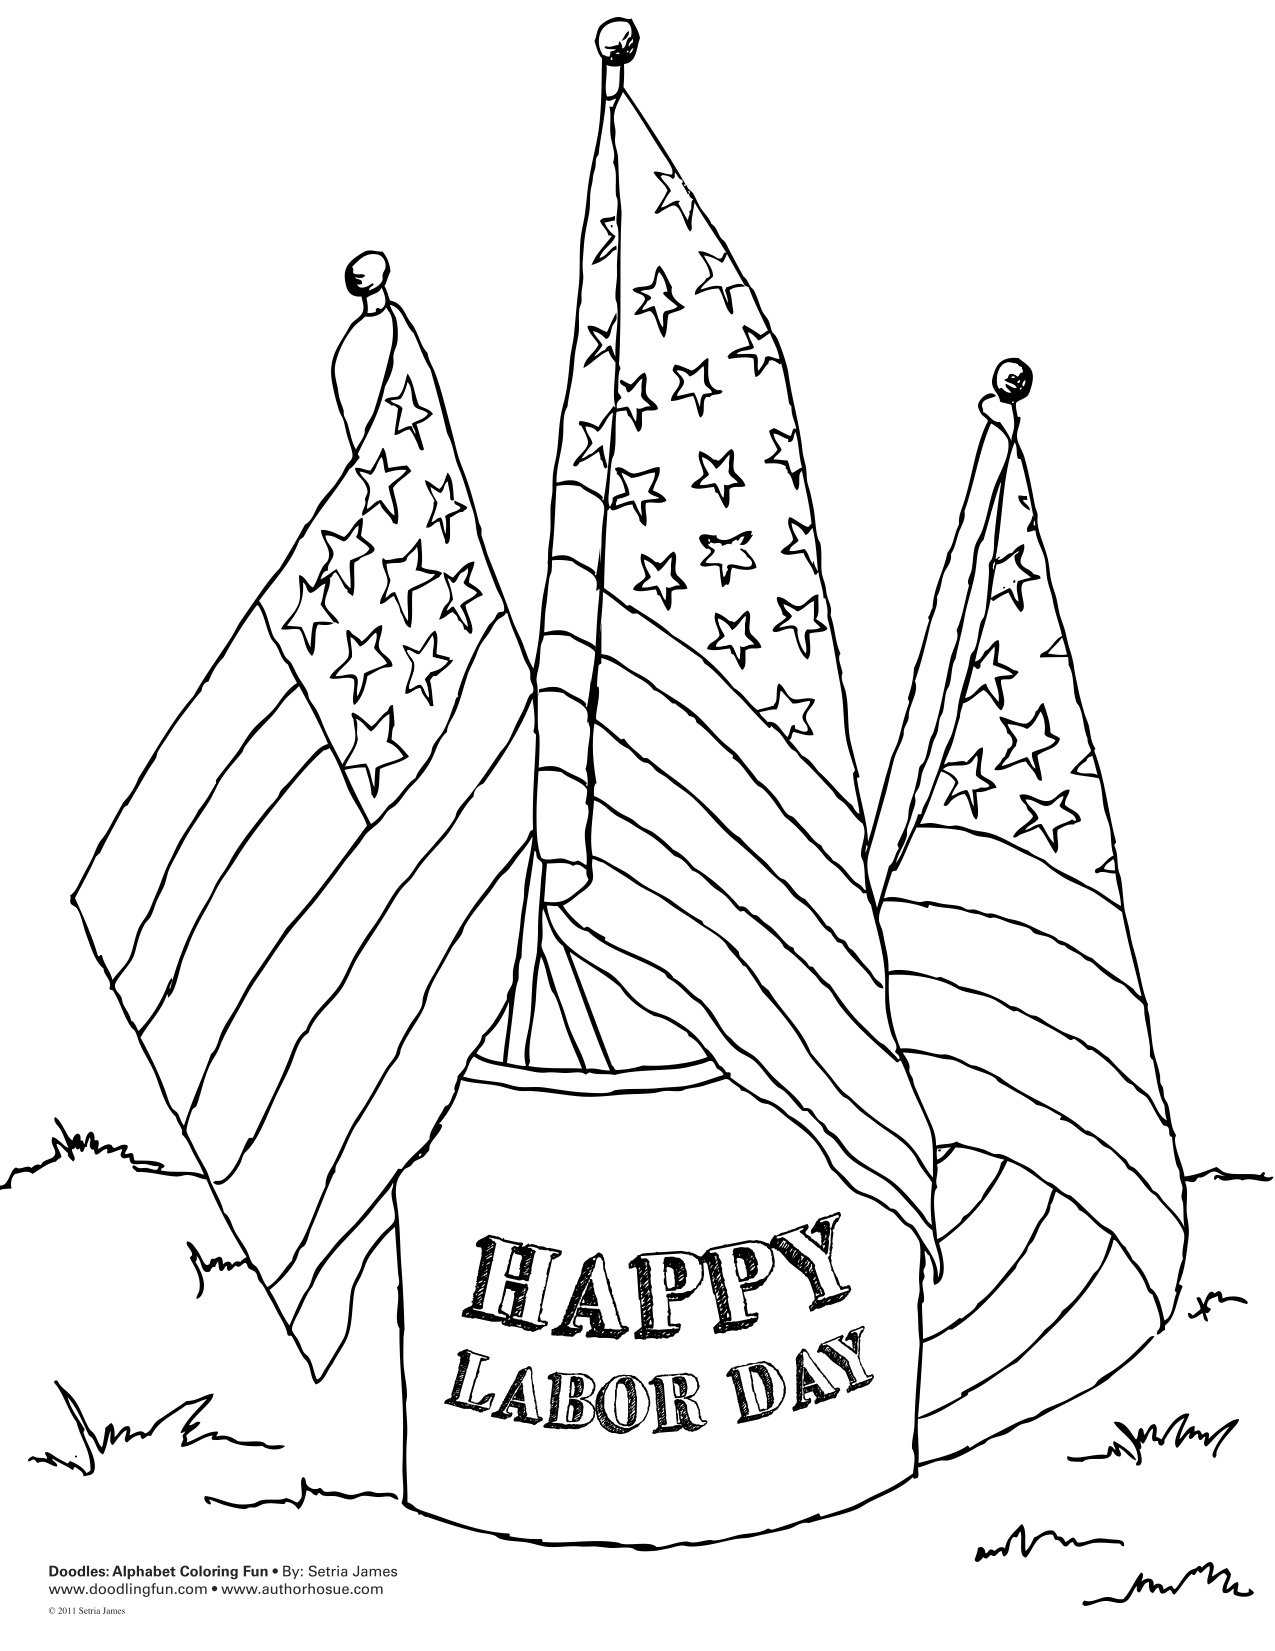 Happy Labor Day-Coloring Sheet | Doodles Ave